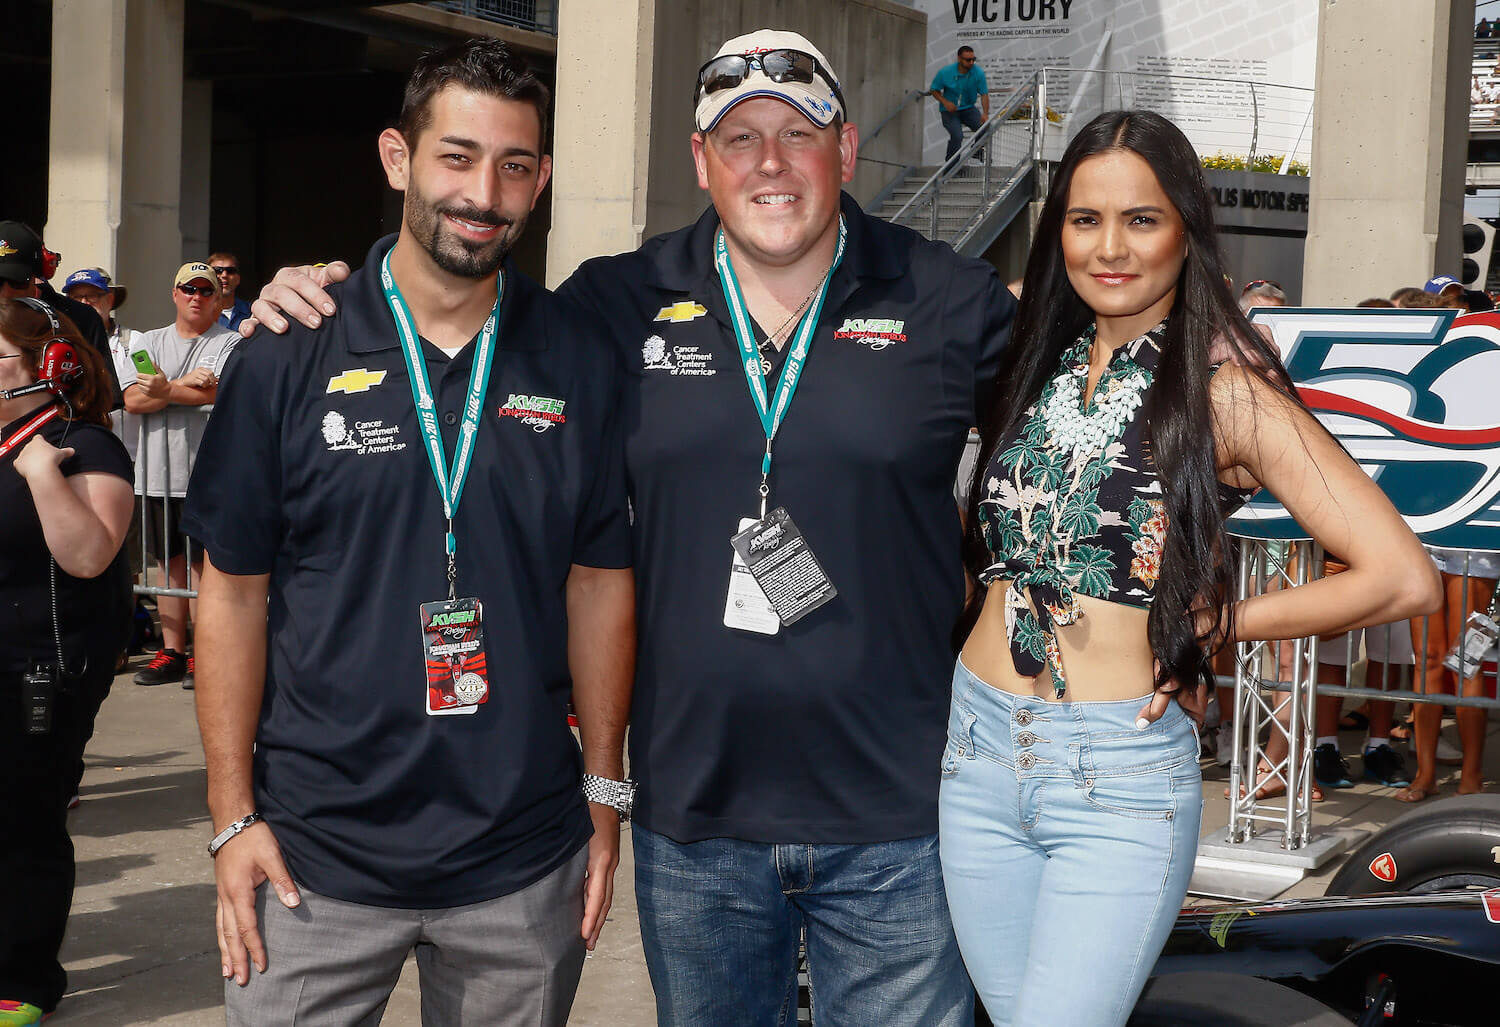 'Deadliest Catch' captains Josh Harris and Casey McManus from the F/V Cornelia Marie next to a woman while at the Indy 500